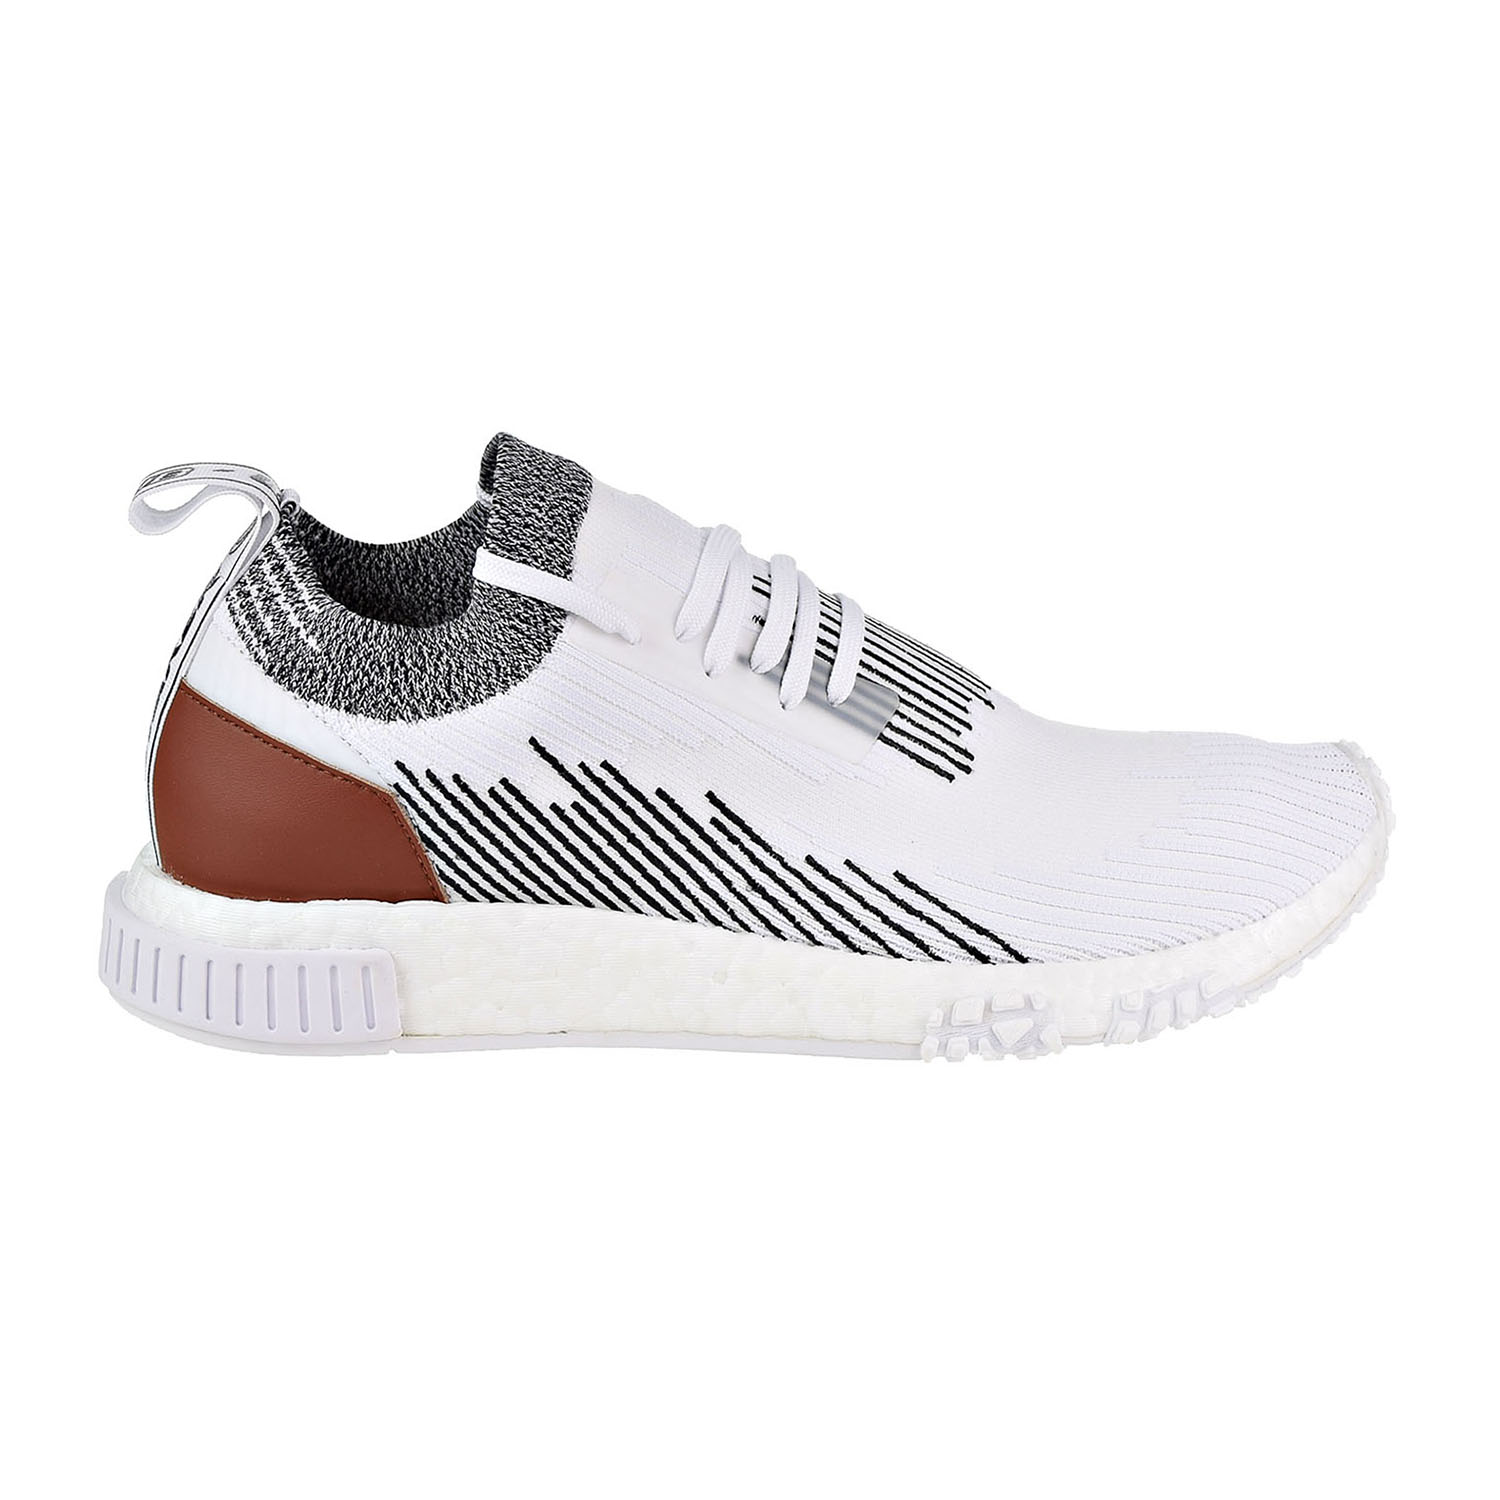 adidas nmd_racer shoes men's